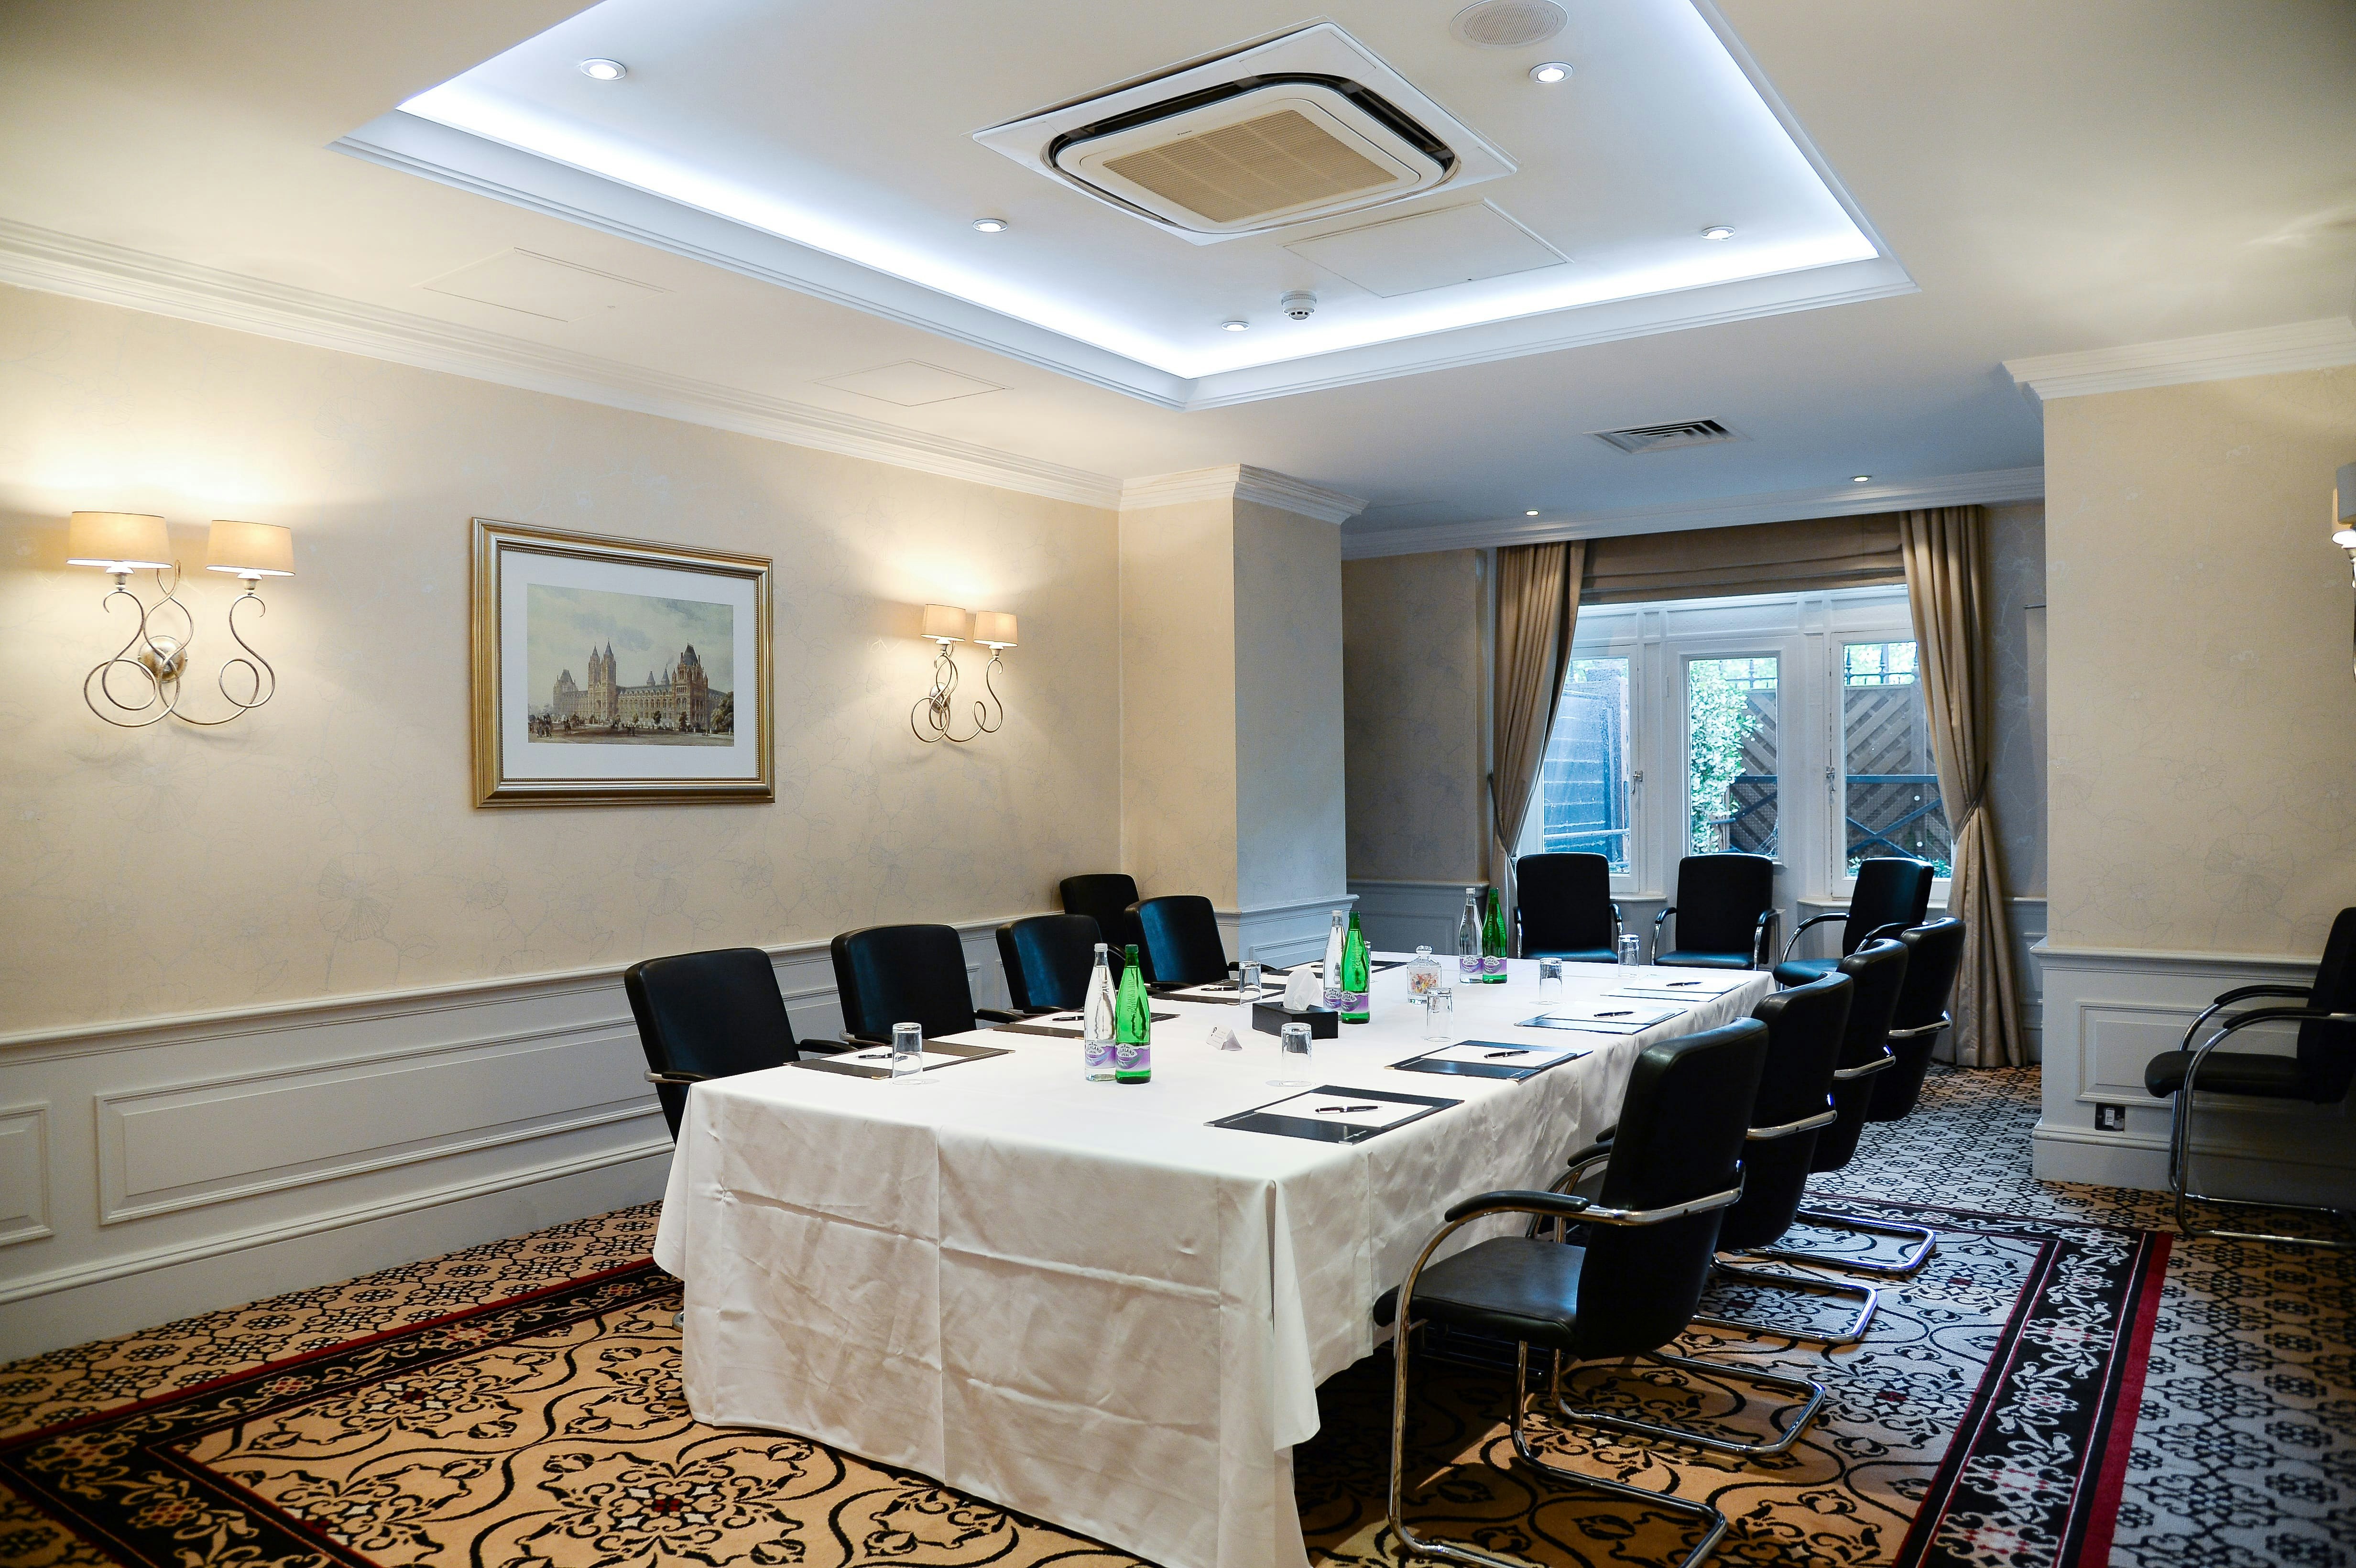 Exclusive Private Dining Rooms Venues in London - The Royal Horseguards Hotel and One Whitehall Place